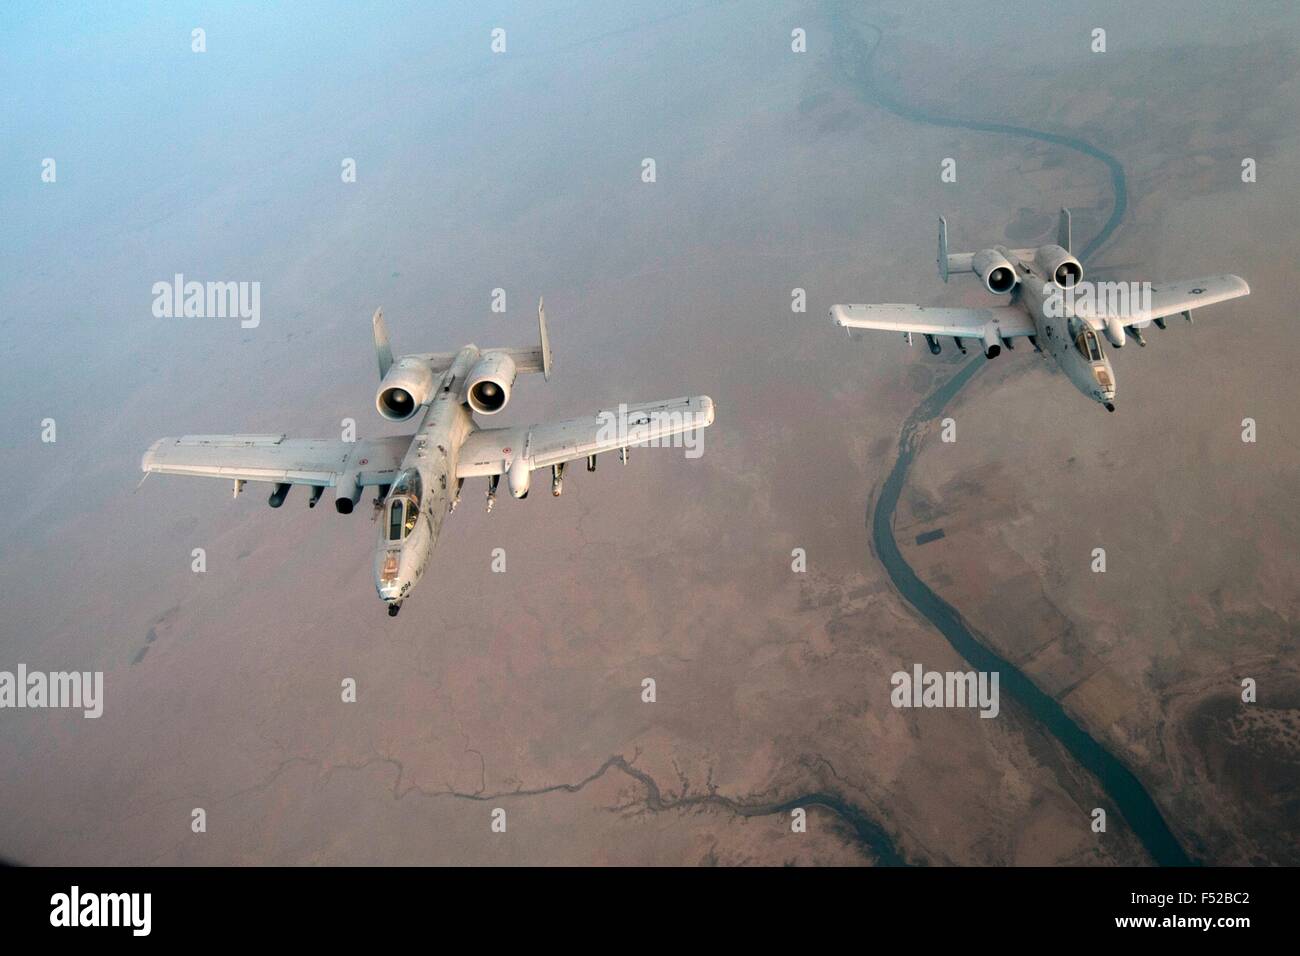 A US Air Force A-10 Thunderbolt II ground support aircraft line up for aerial refueling during combat operations in support of Operation Inherent Resolve October 13, 2015 over Iraq. Stock Photo